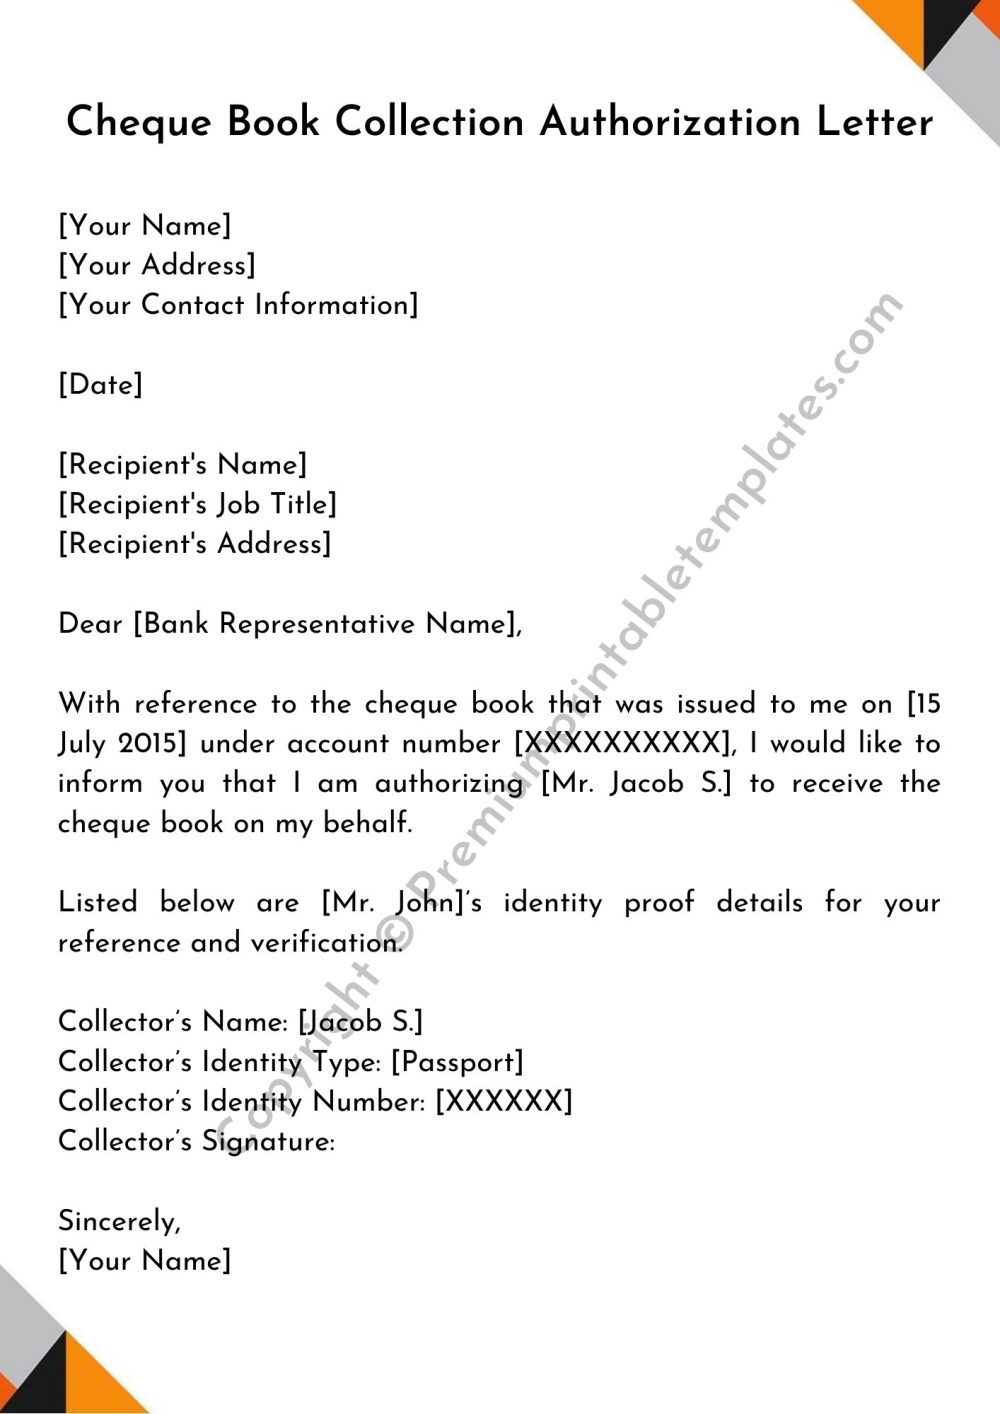 Authorization Letter for Cheque Book Collection